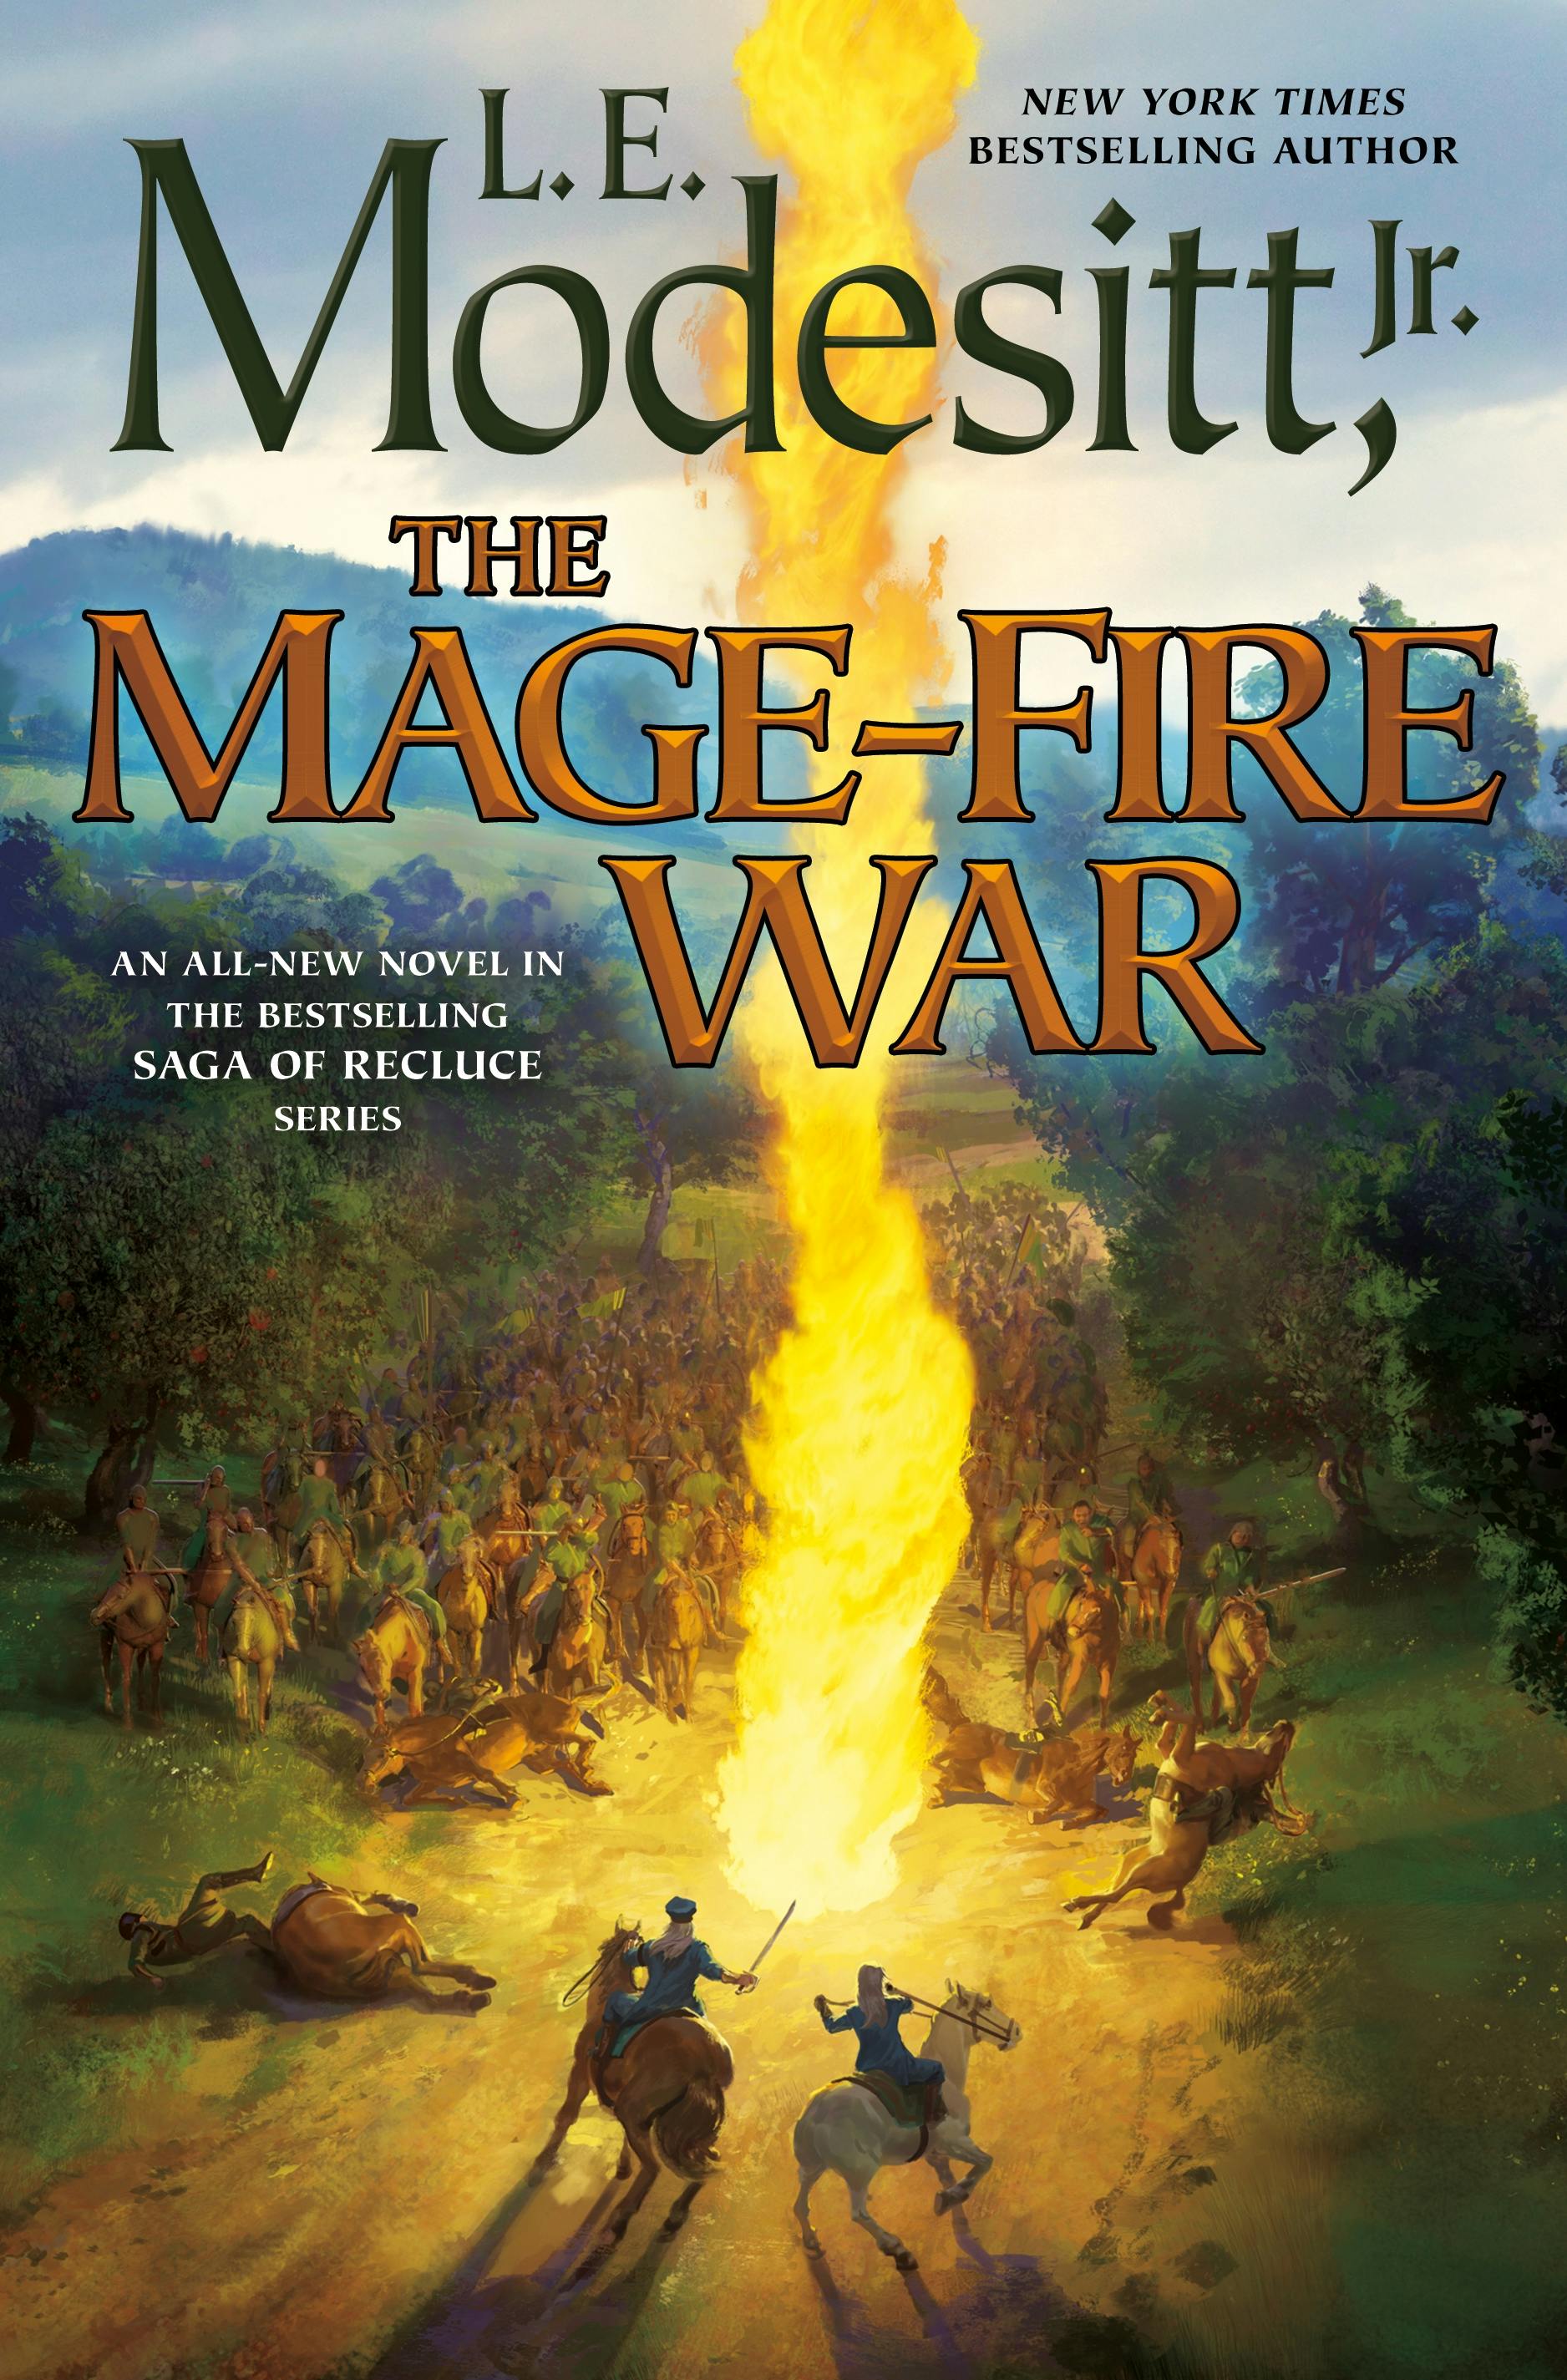 Cover for the book titled as: The Mage-Fire War